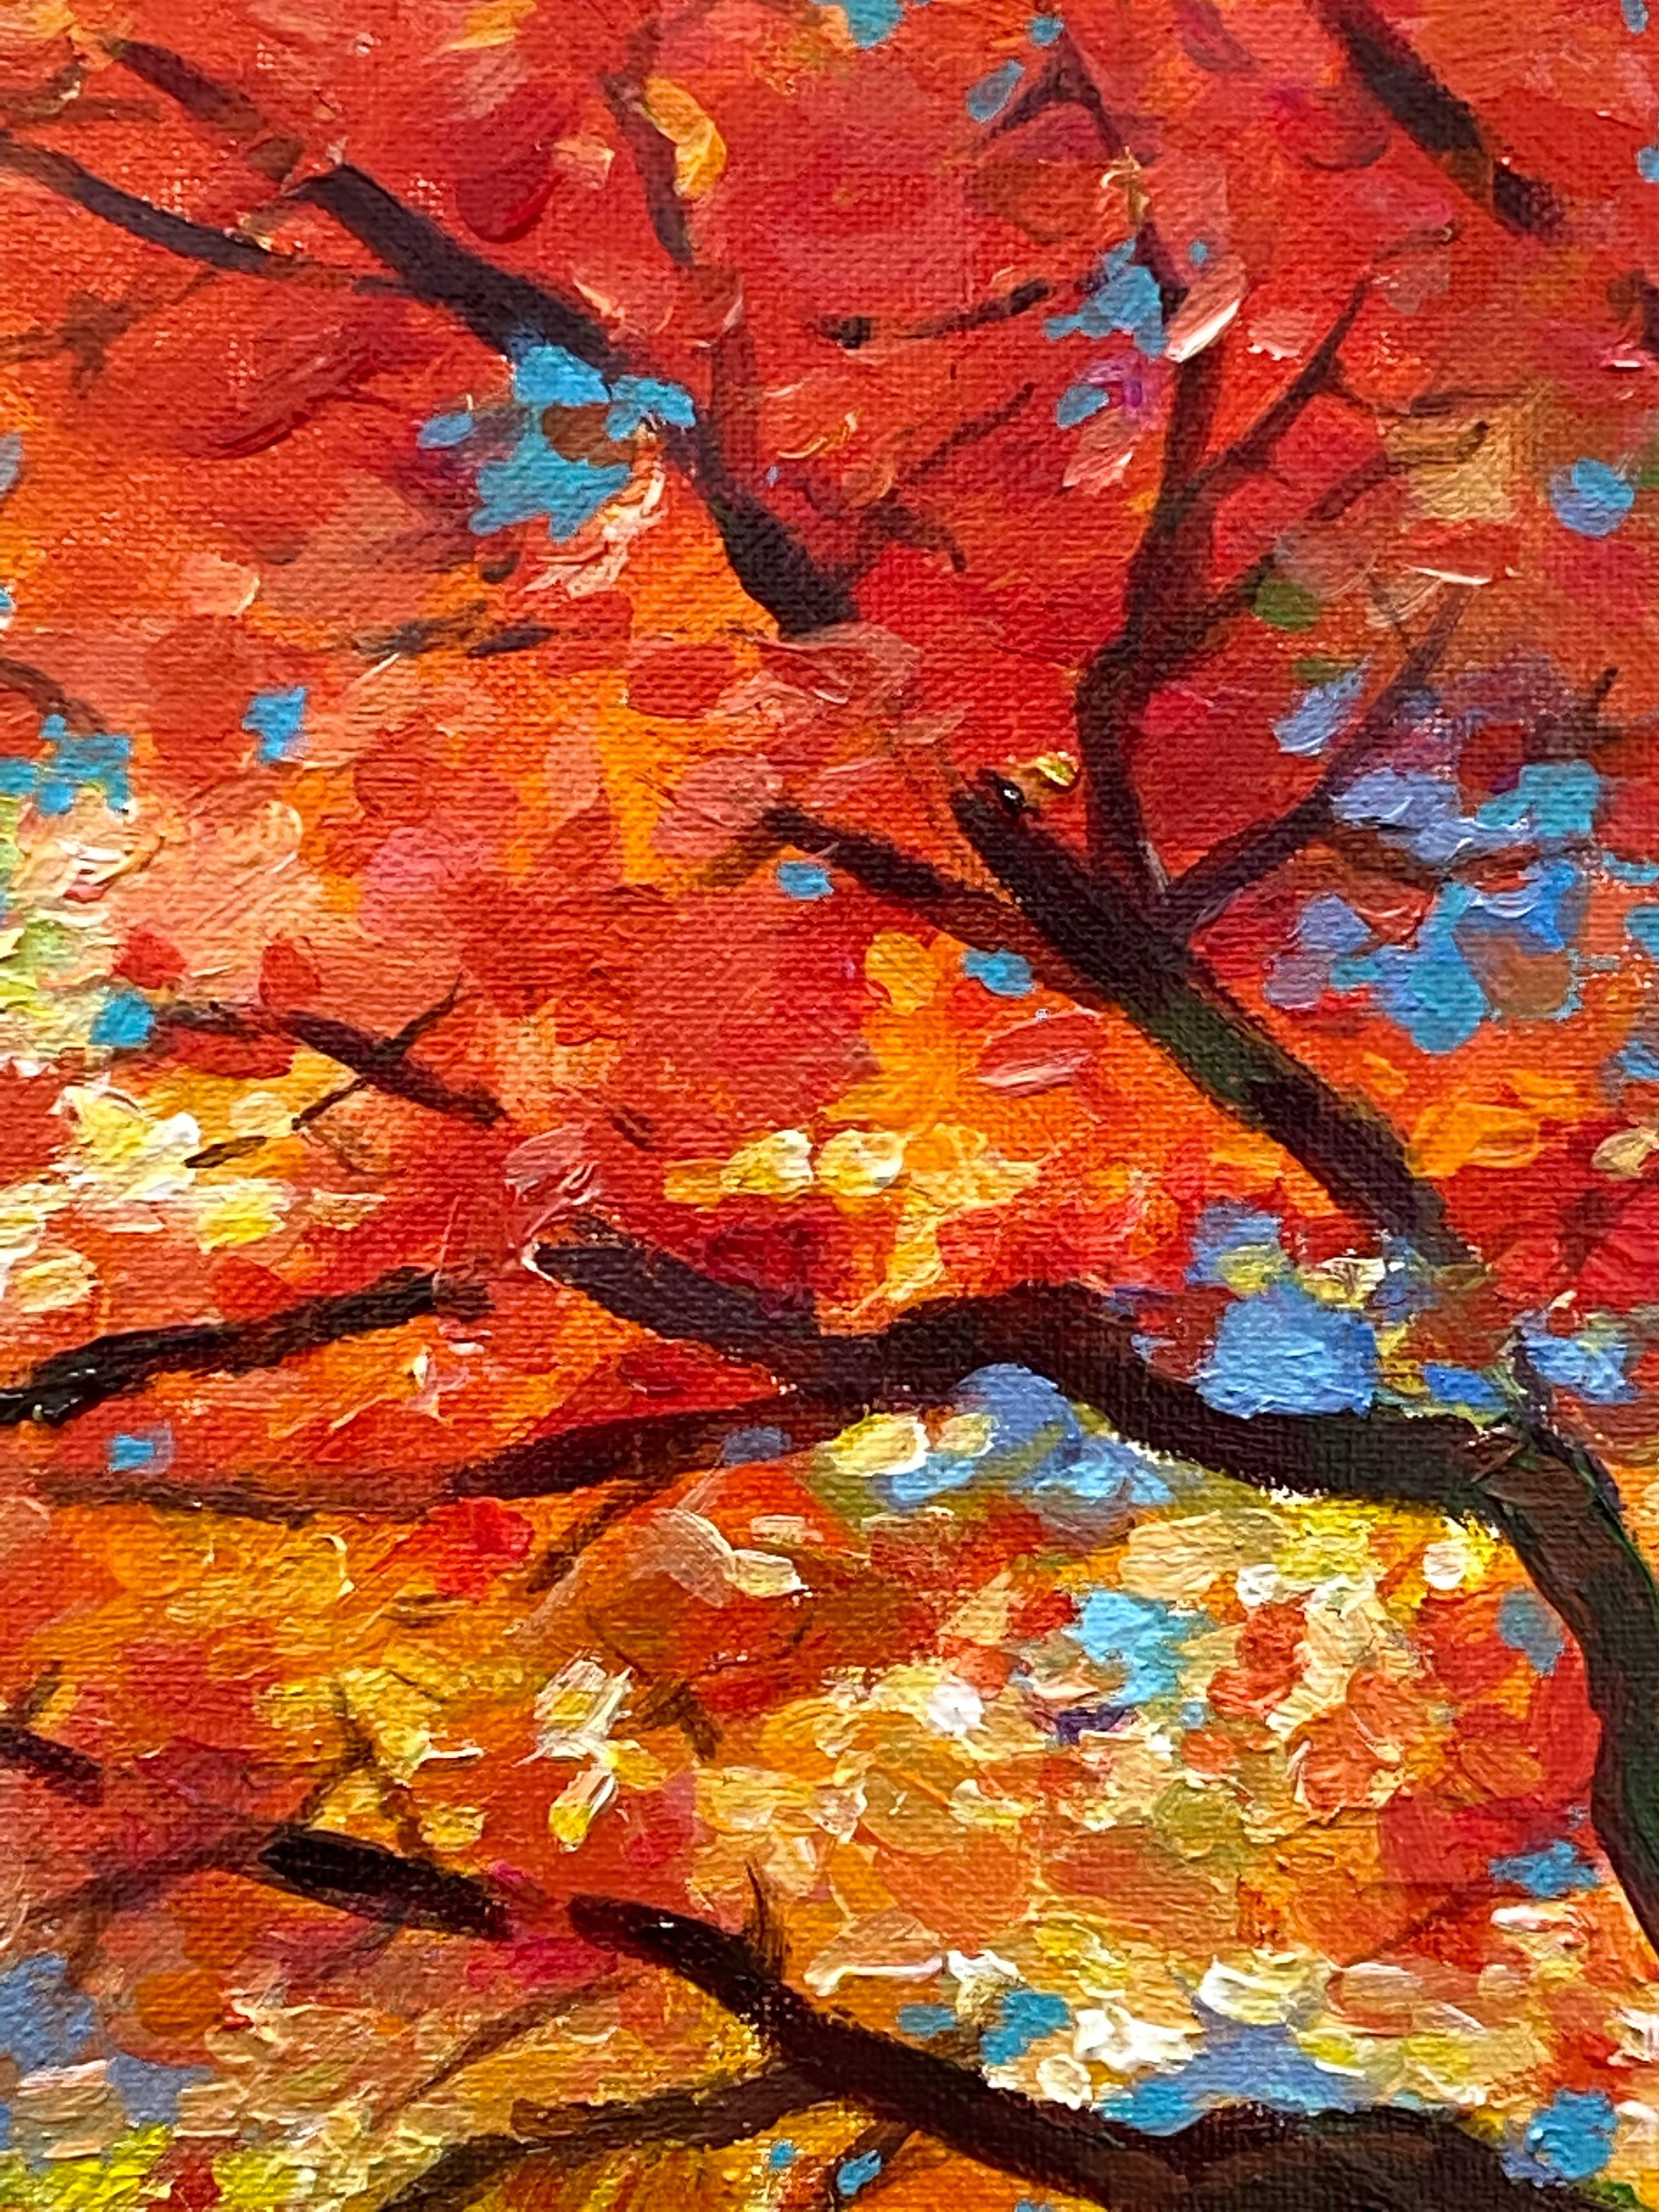 Dance in the Wind (fall tree autumn colors orange red yellow leaves landscape) - Post-Impressionist Painting by Jing Fu